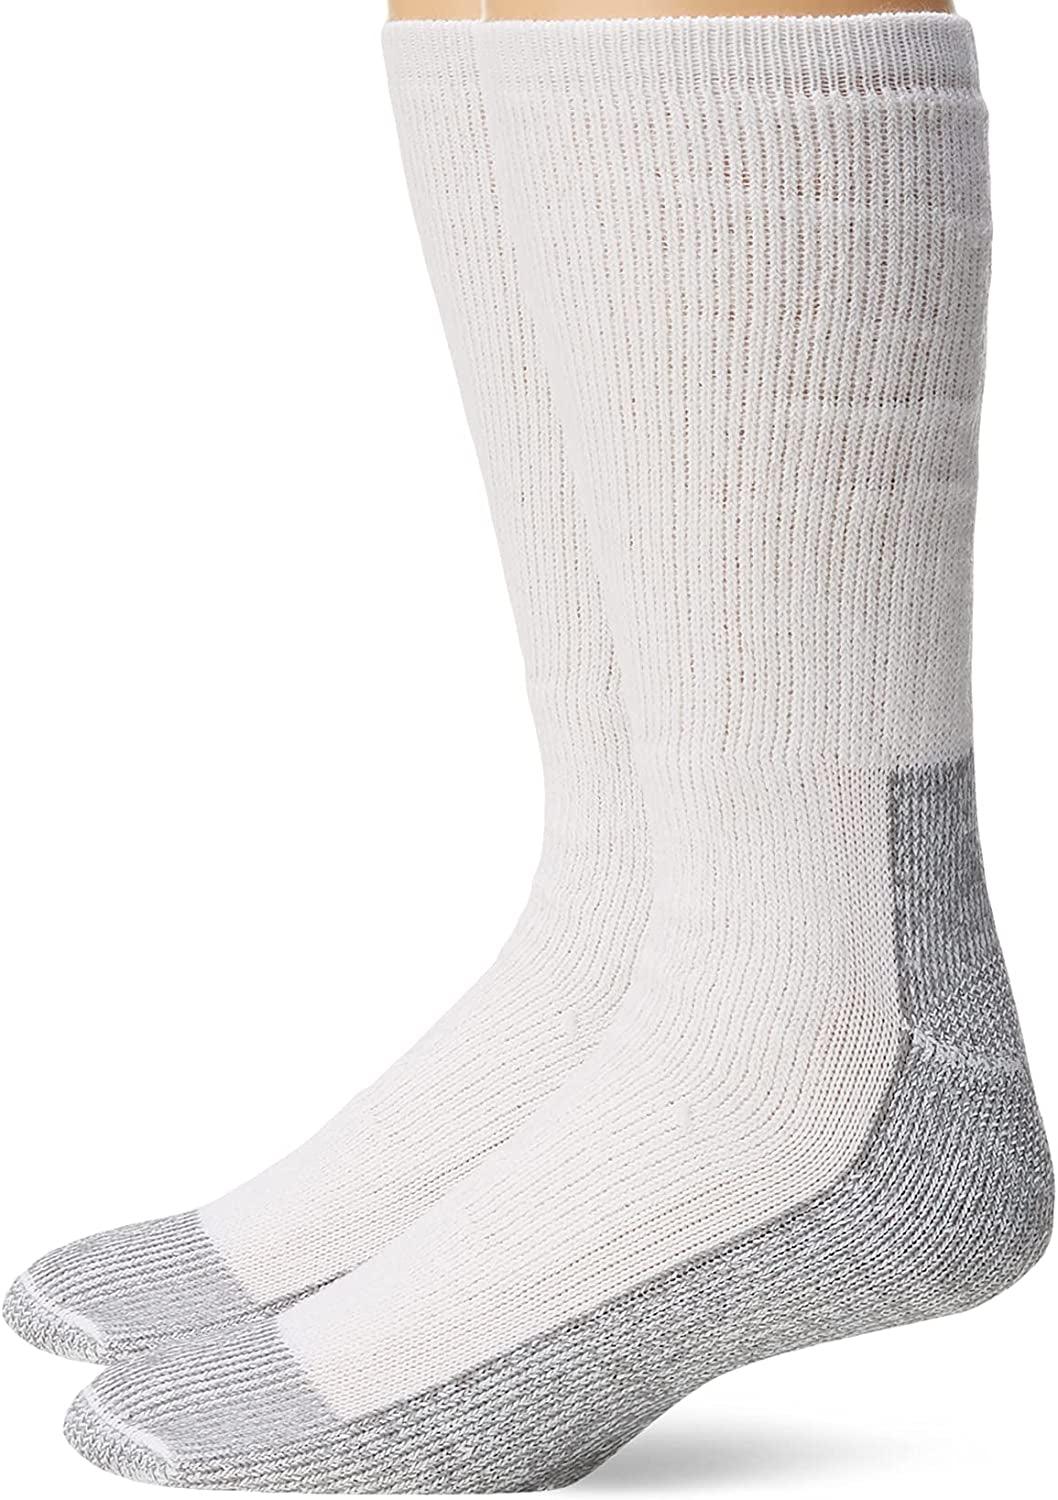 Fruit of the Loom Mens Cushioned Durable Cotton Work Gear Socks with Moisture Wicking